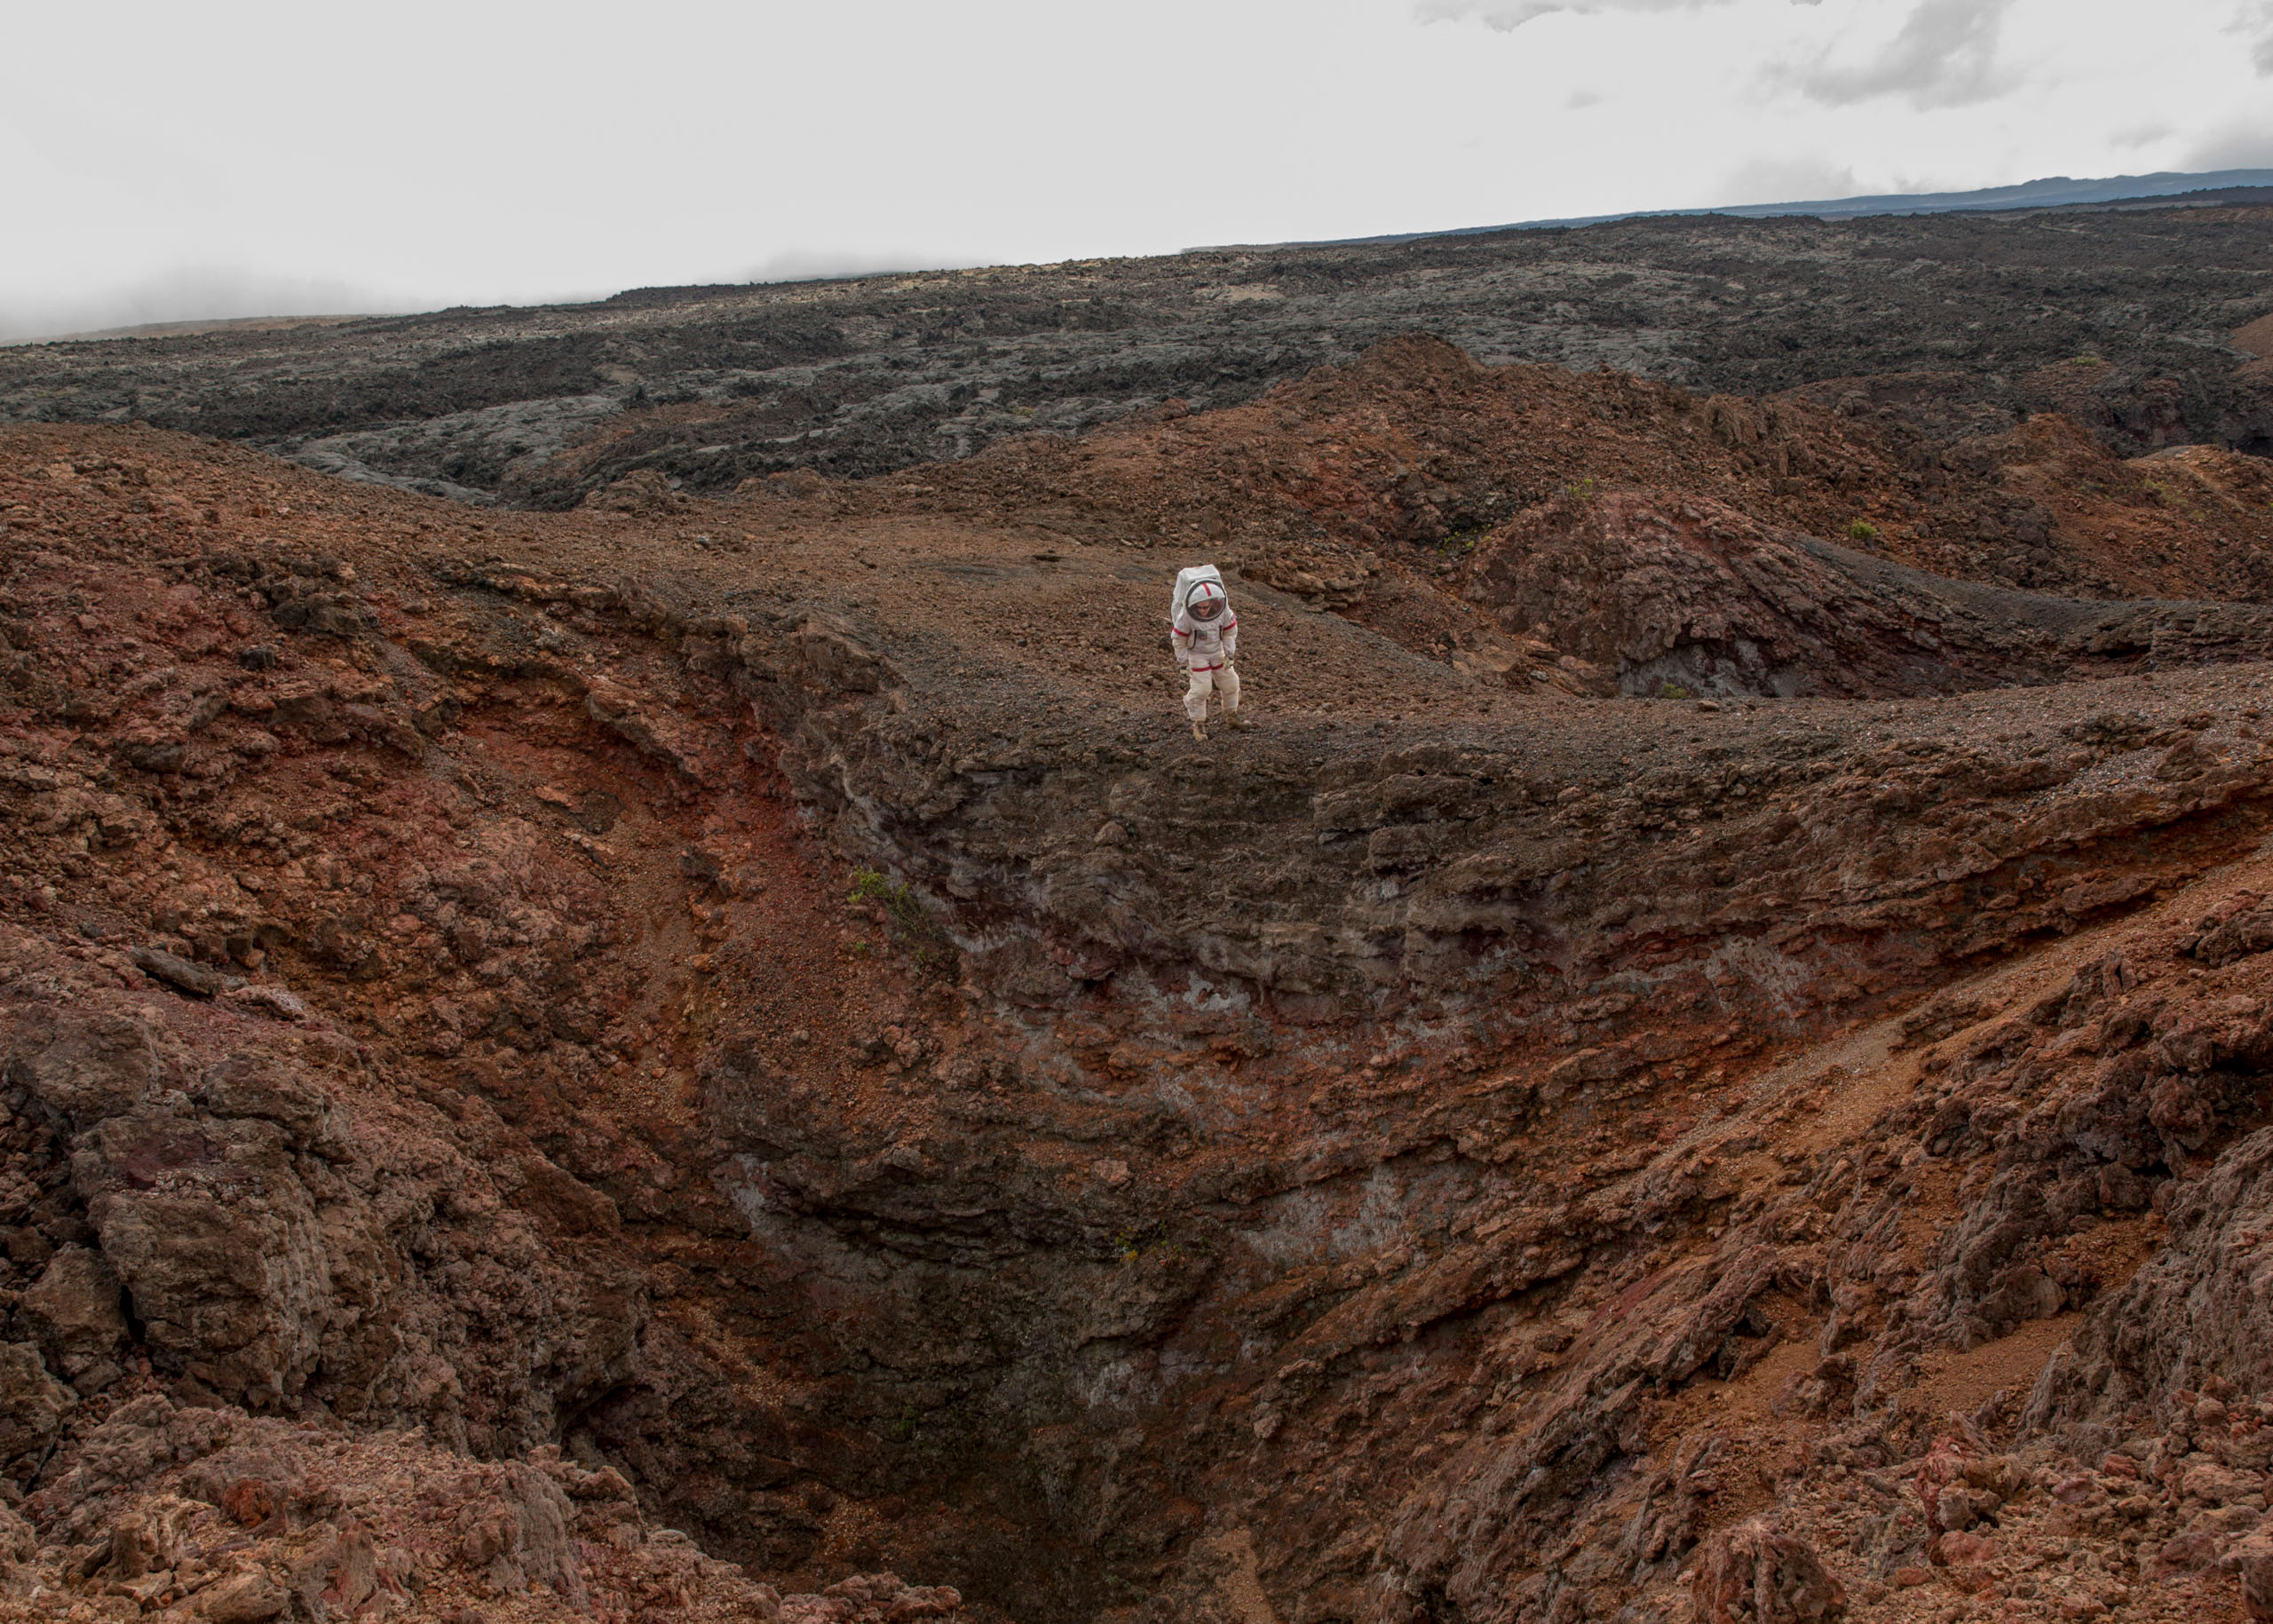 Carmel Johnston, Crew Commander for Mission 4, reenacts a spacewalk in a lava field near the HI-SEAS habitat on the island of Hawaii on Aug. 29, 2016. The crew emerged from 365 days in isolation on Aug. 28. (Cassandra Klos for TIME)